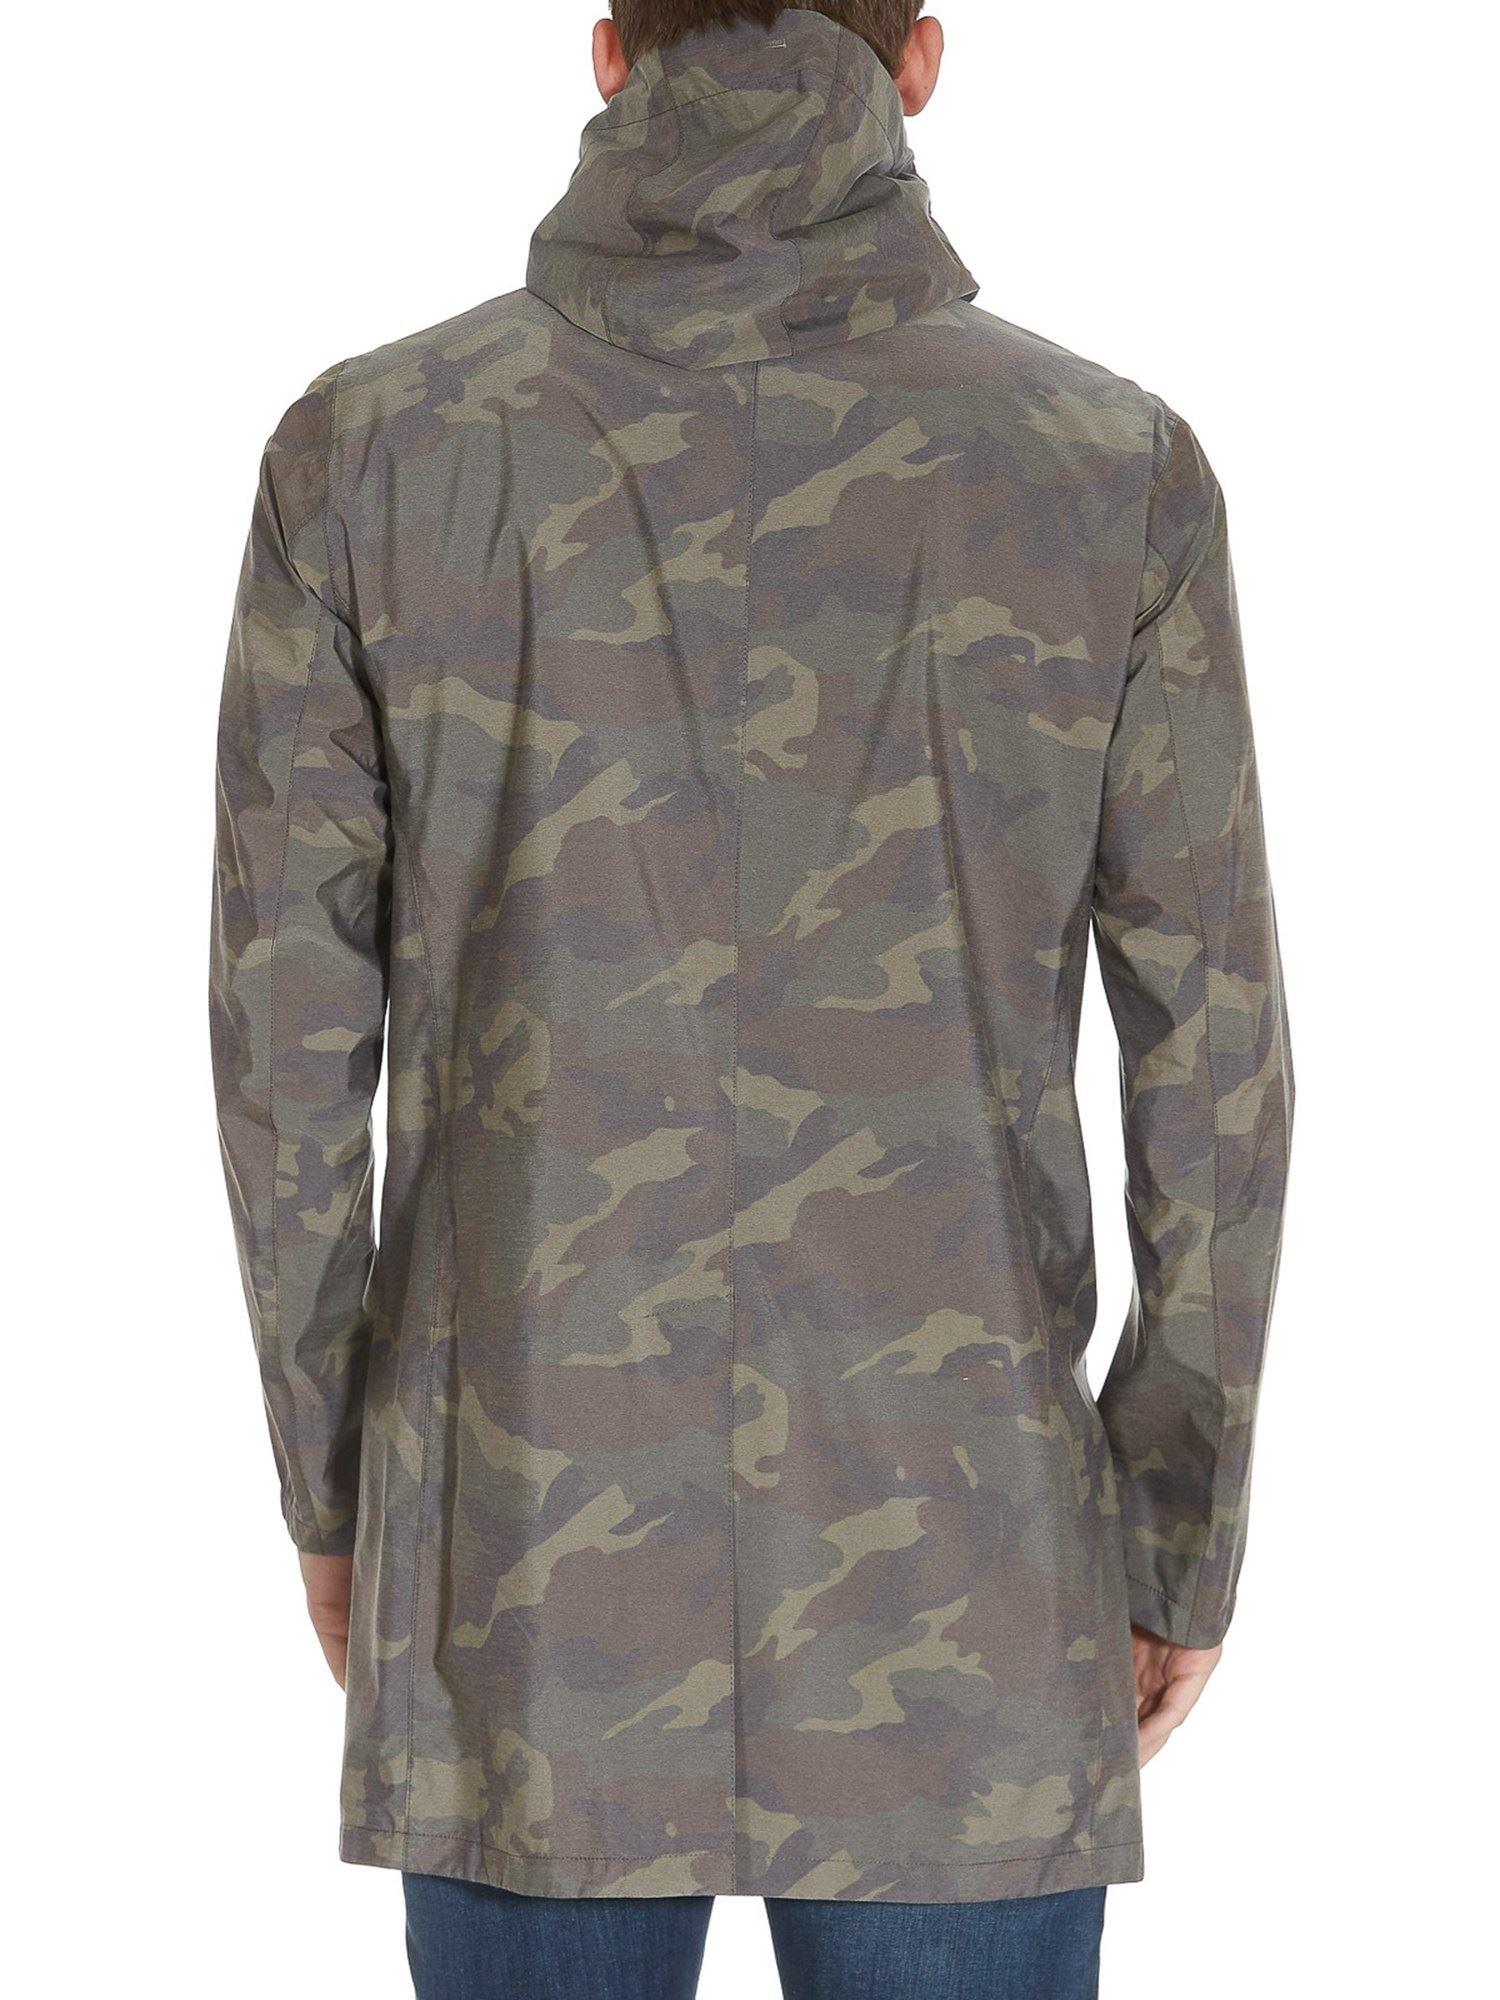 Herno Laminar Camouflage Raincoat in Gray for Men - Lyst